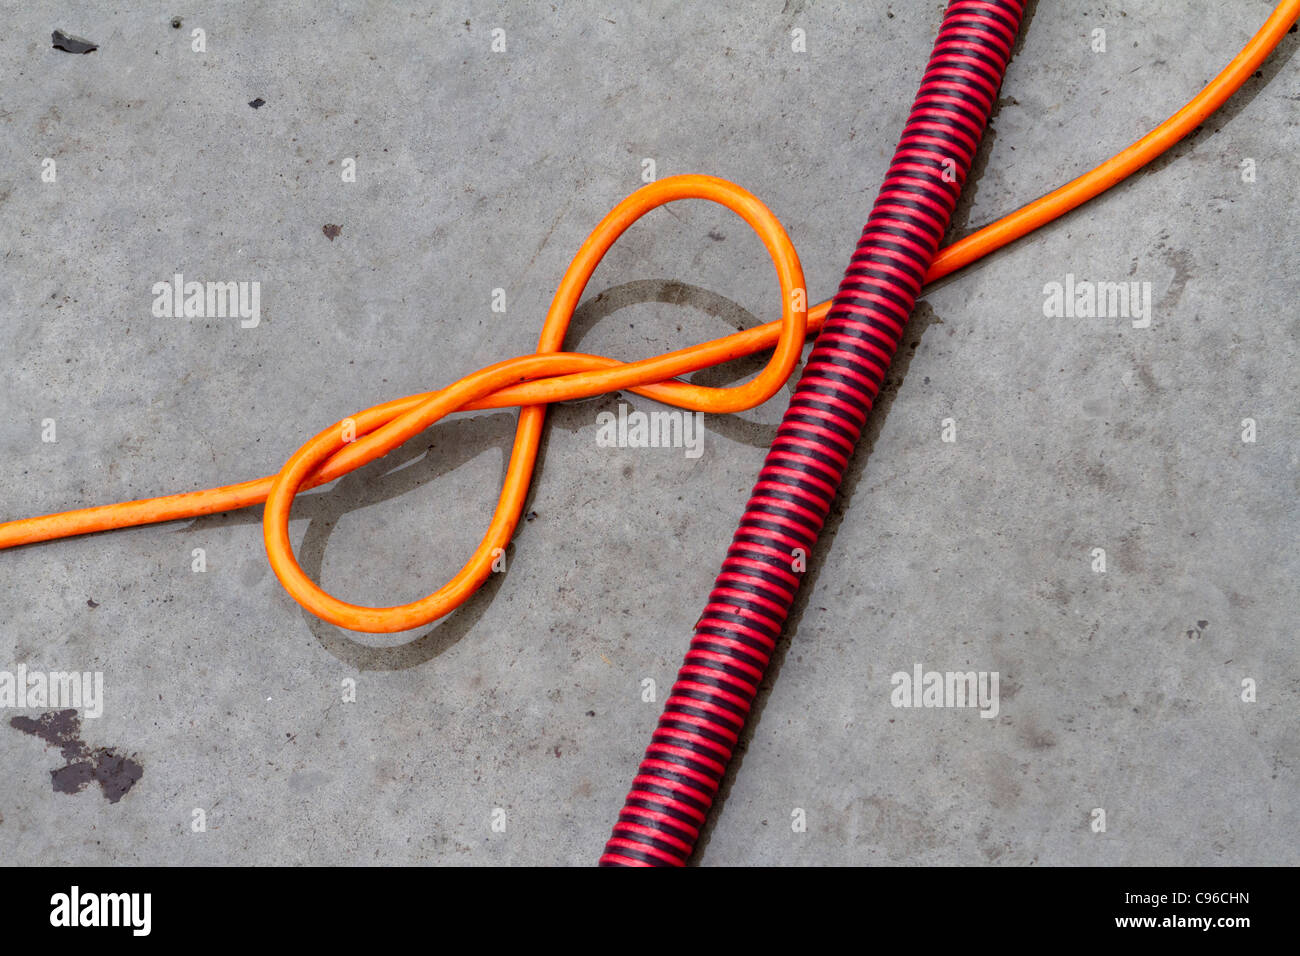 An orange electric flex with a knot in it crossed by a red and black striped plastic hose or conduit Stock Photo